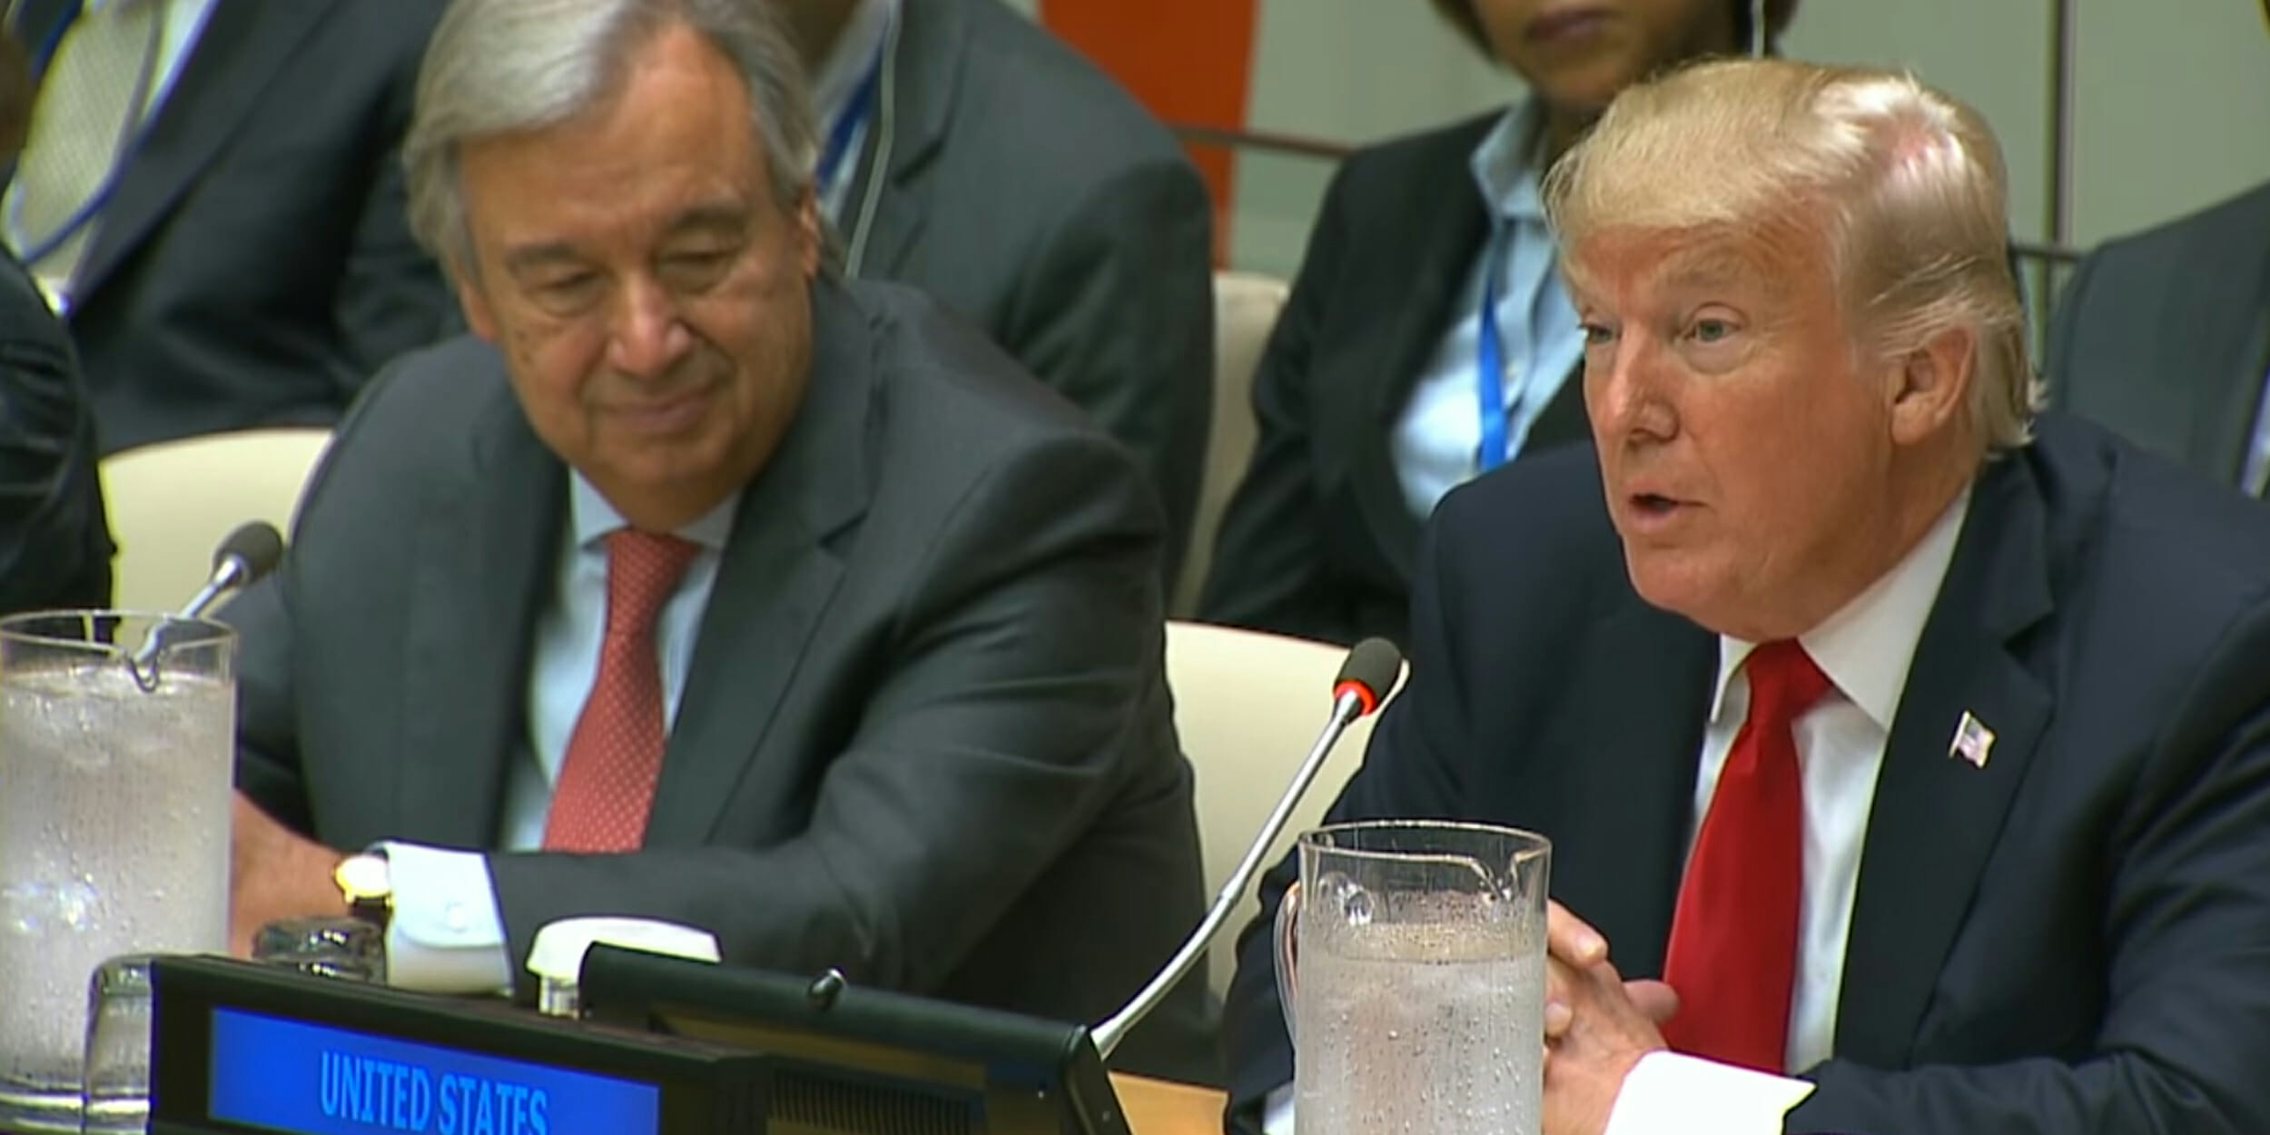 Donald Trump speaks at the United Nations on Sept. 18, 2017.